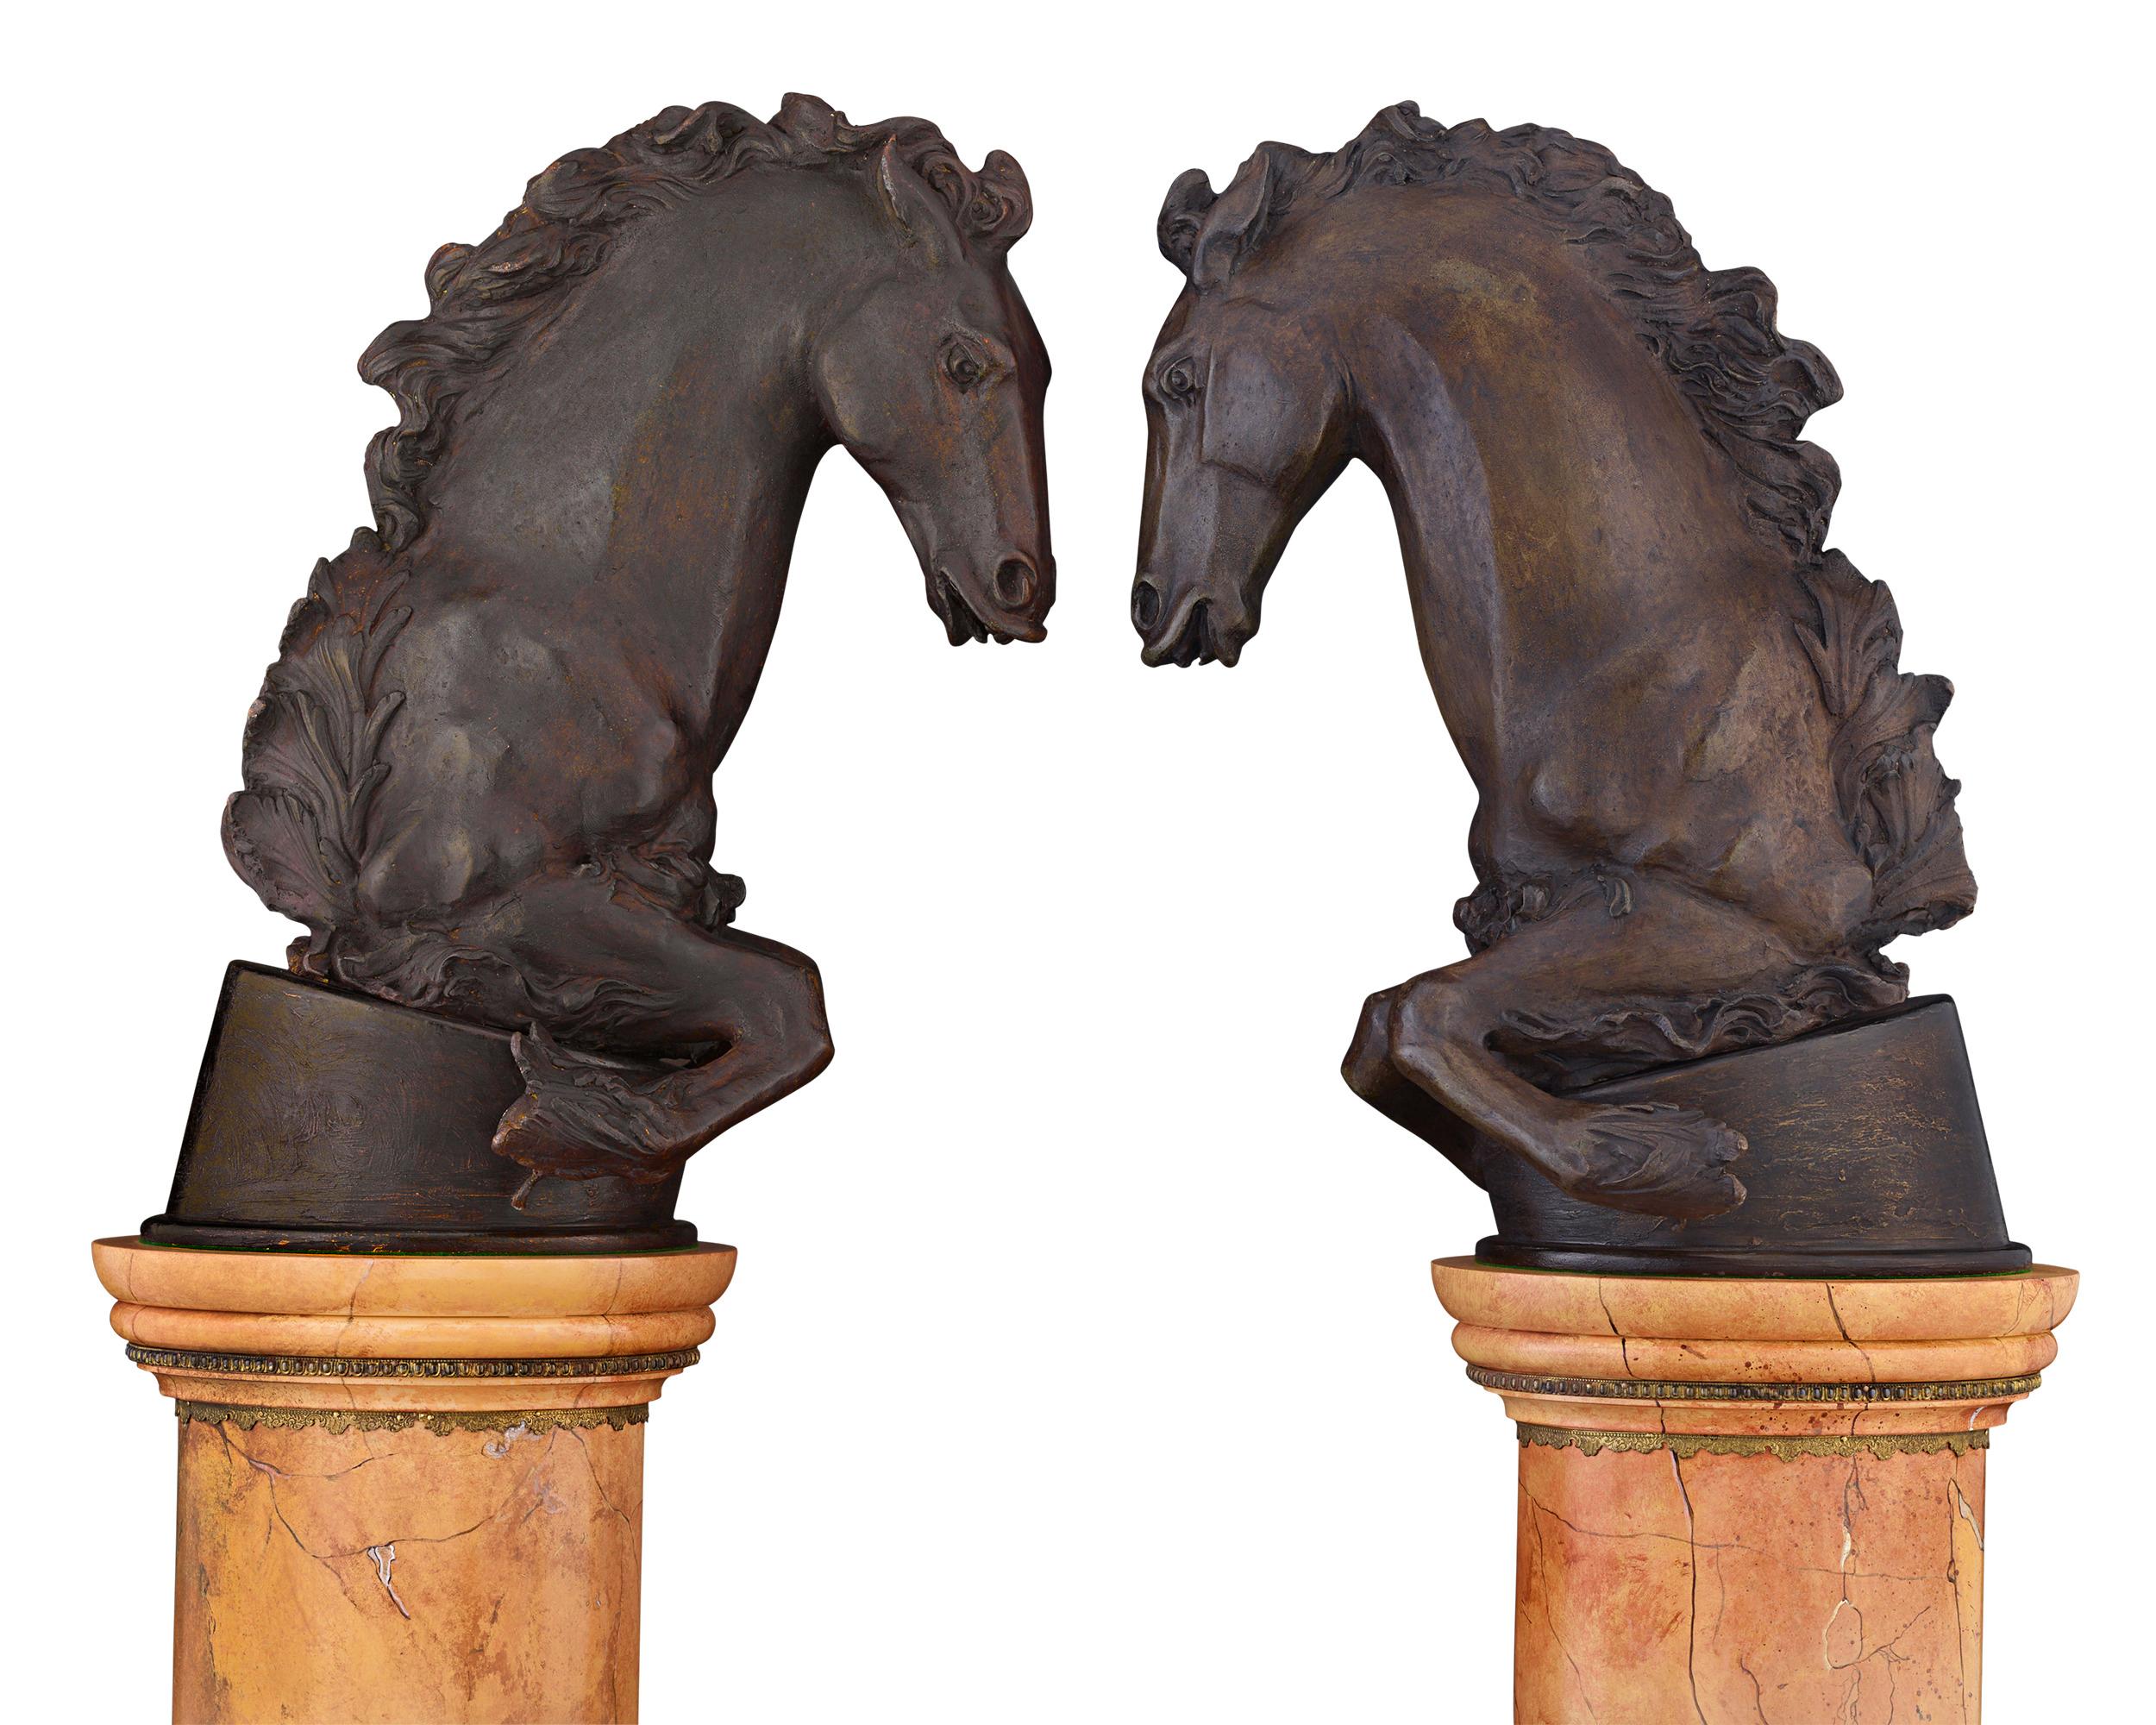 This exceptional pair of bronze horses are attributed to royal French sculptor Jean-Baptiste Tuby, and they recall the lavishly decorated gardens of the grand palaces of Louis XIV. Tuby was, in fact, one of the lead sculptors for the Sun King’s